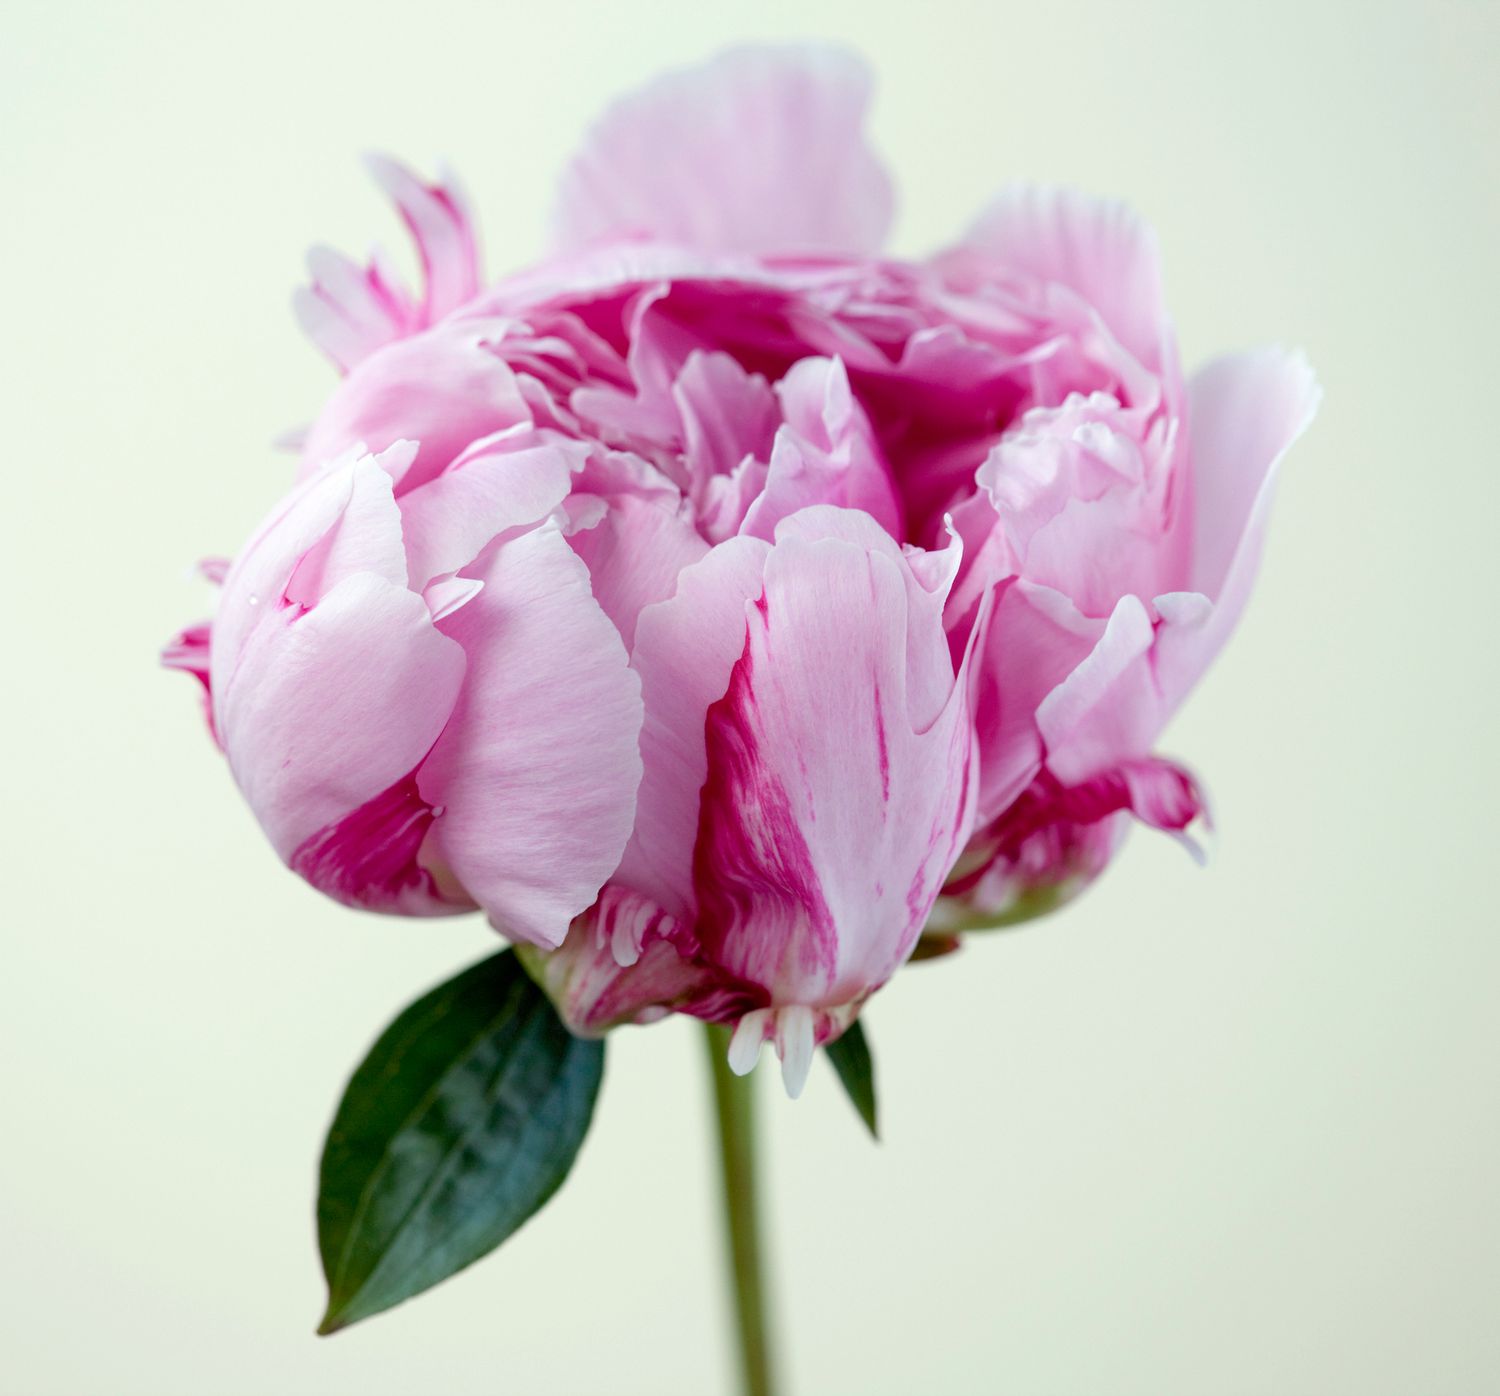 a peony flower against a white background